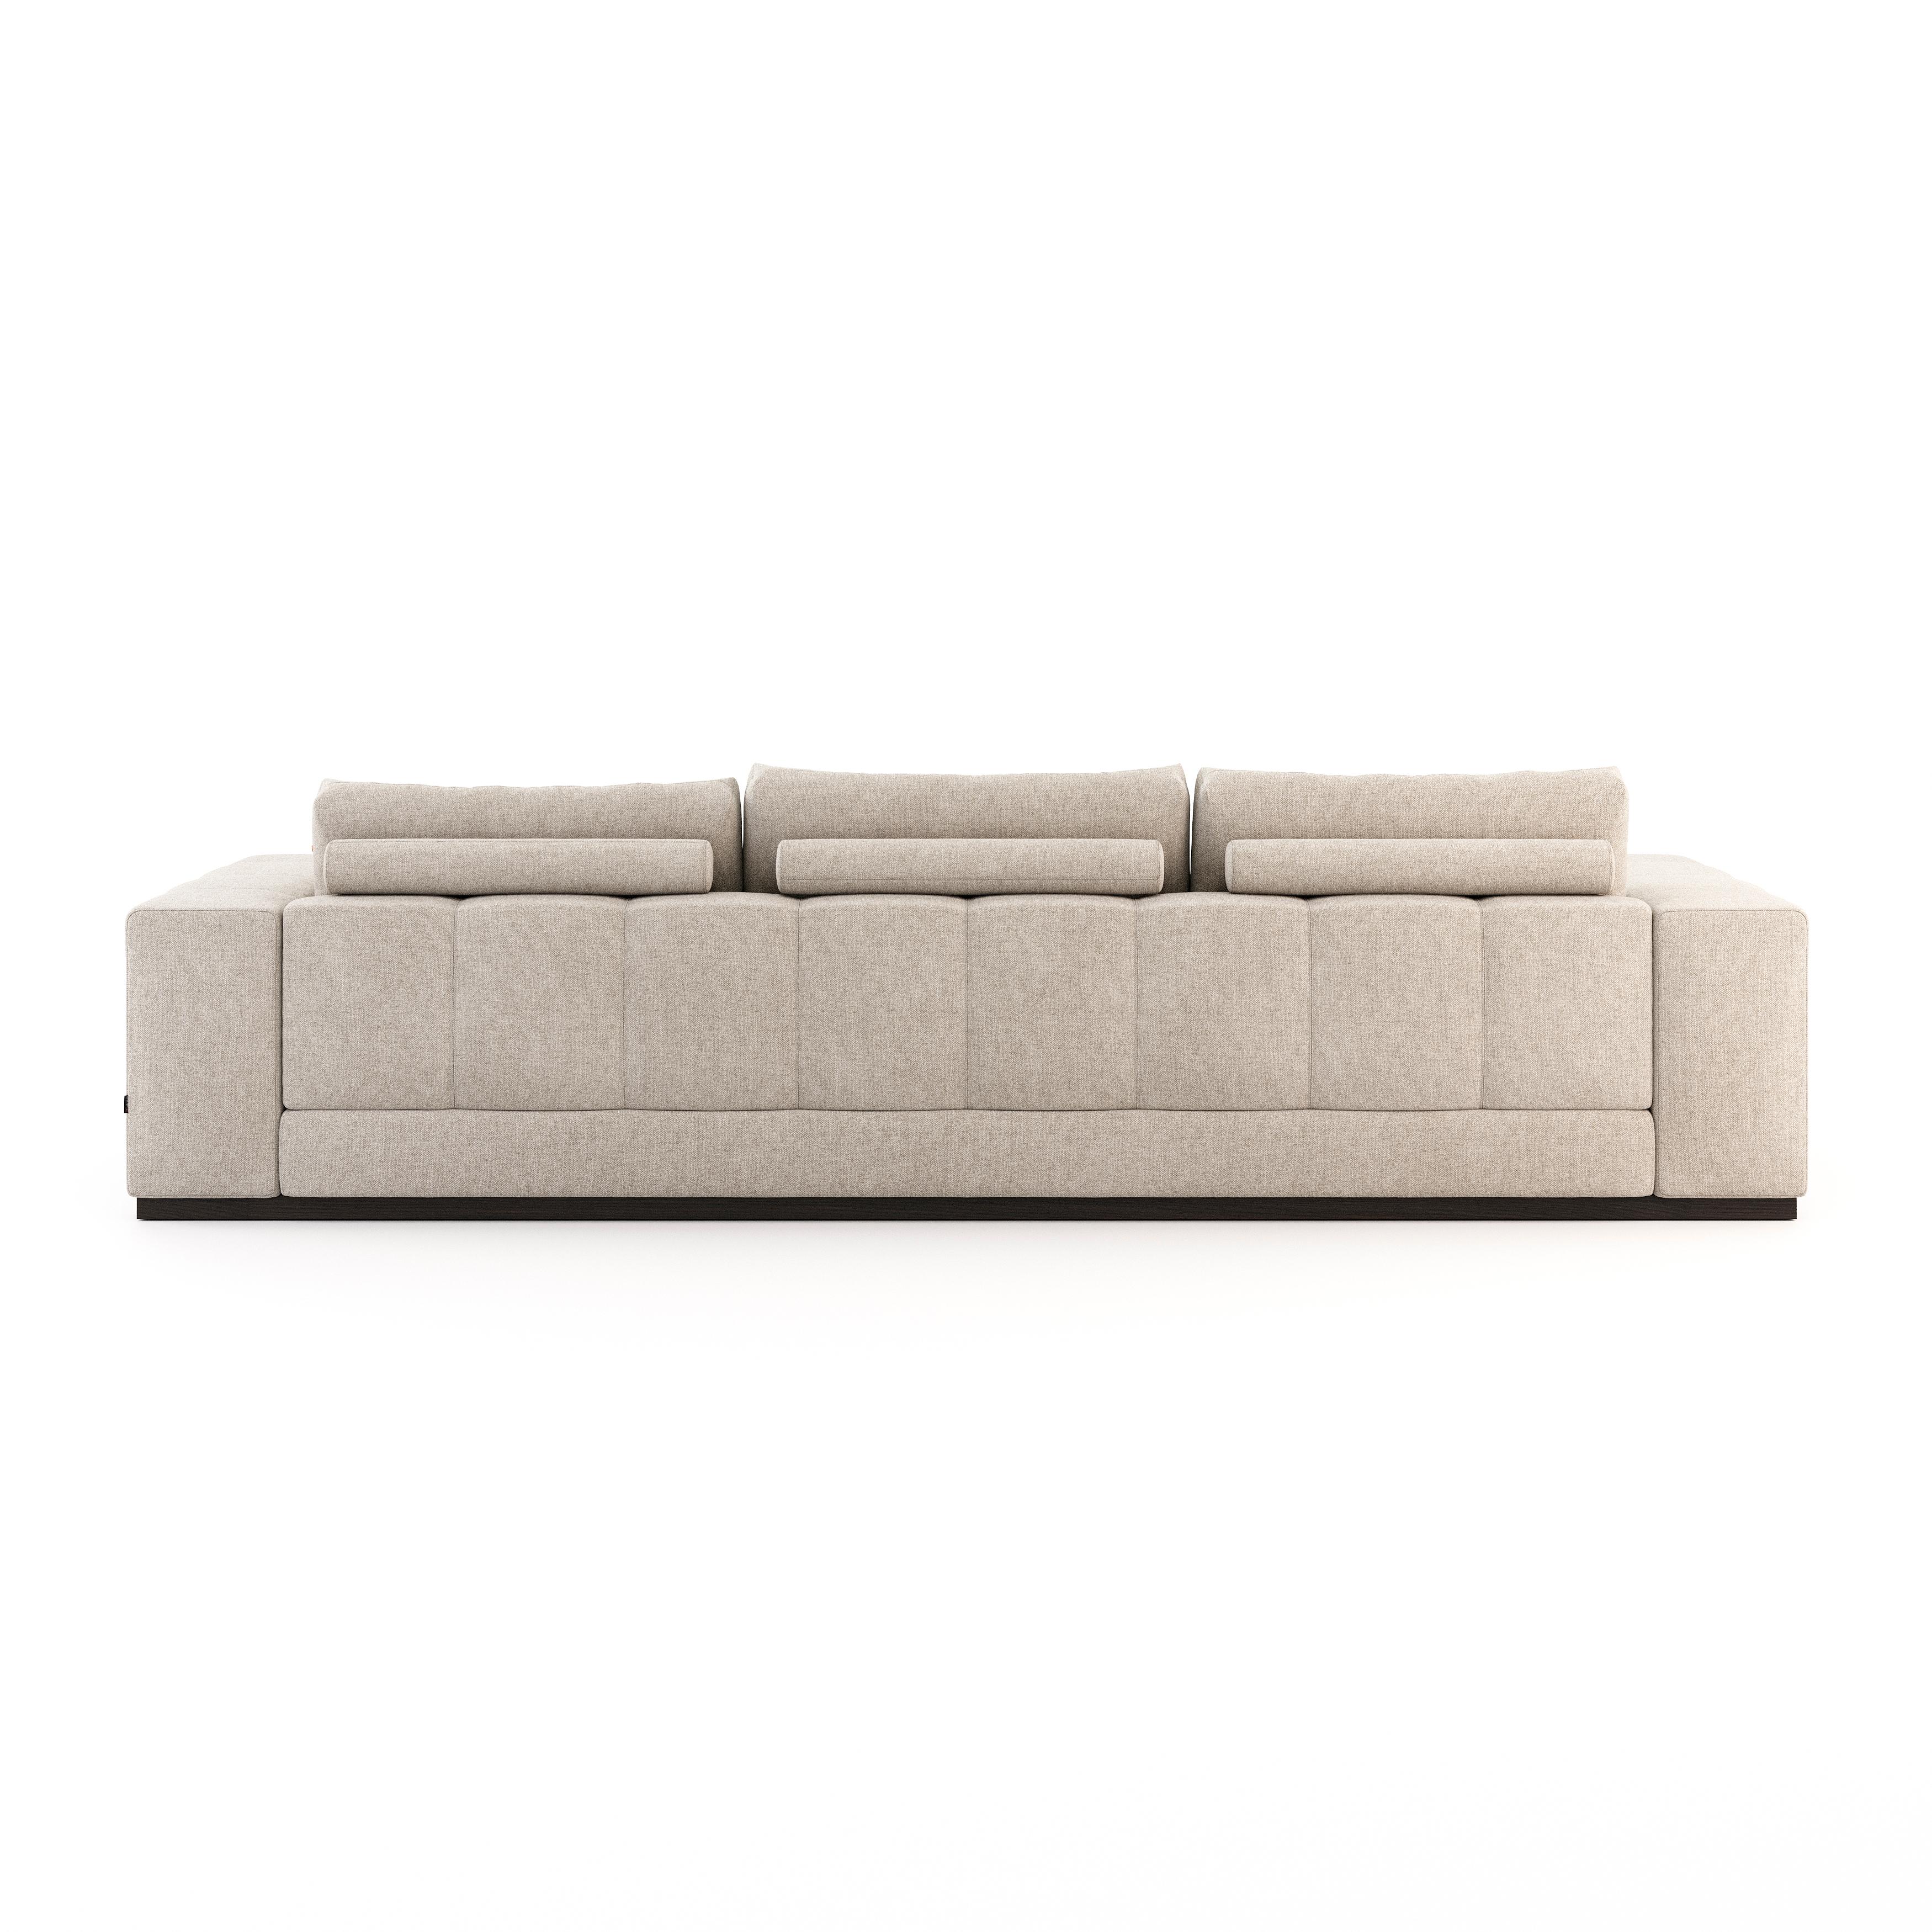 Modern Charlie couch with contemporary design fully customisable For Sale